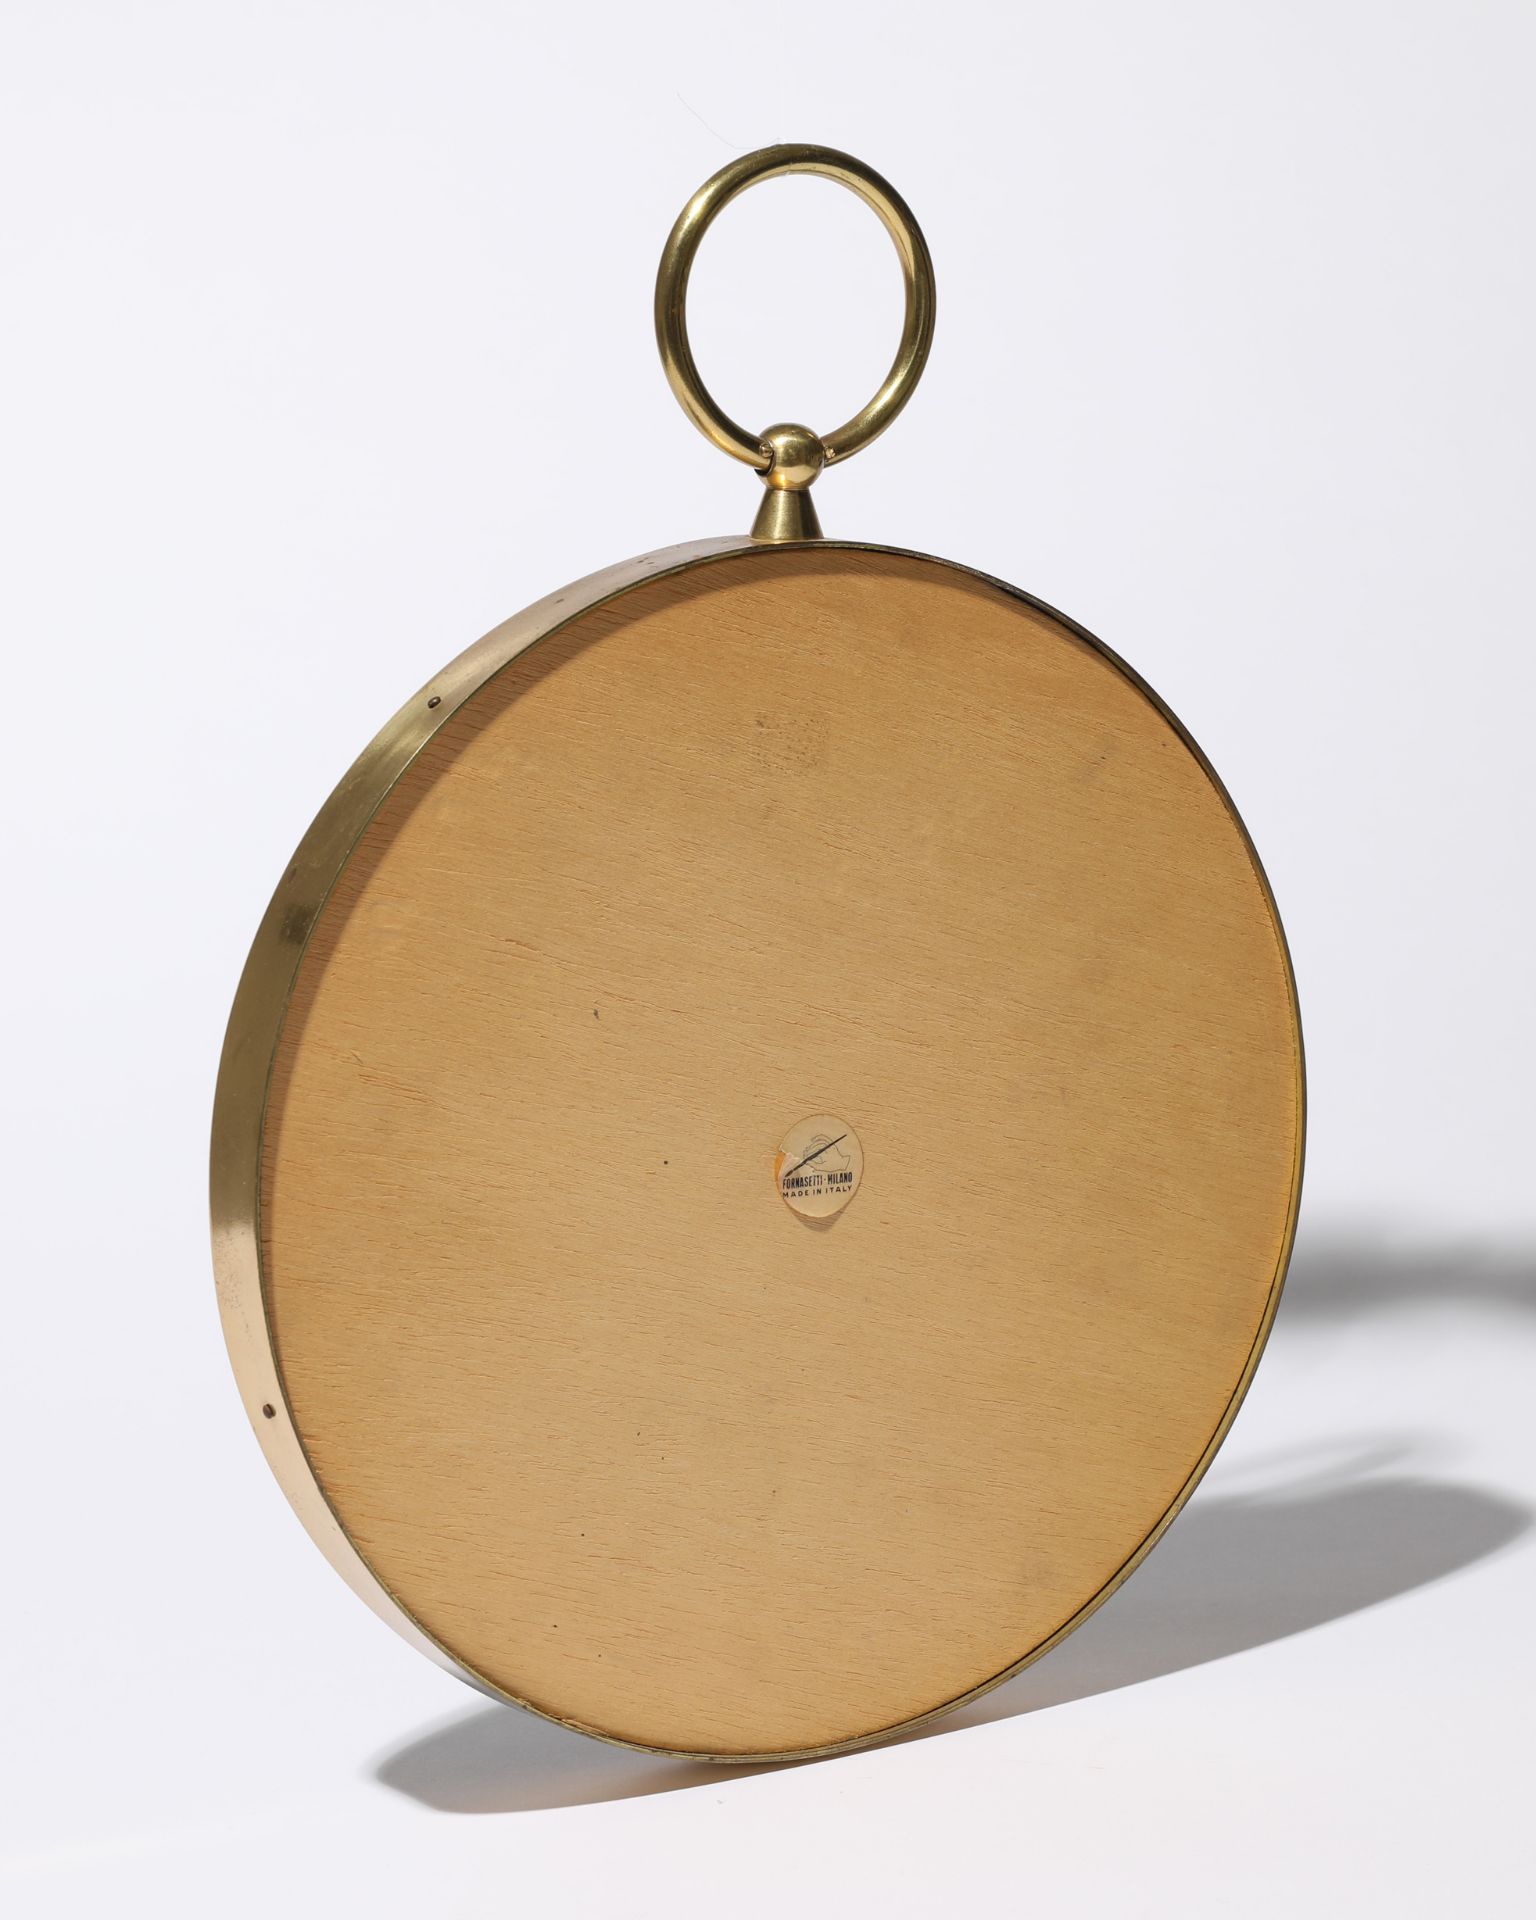 Piero Fornasetti, Wall Mirror with convex circles - Image 4 of 5